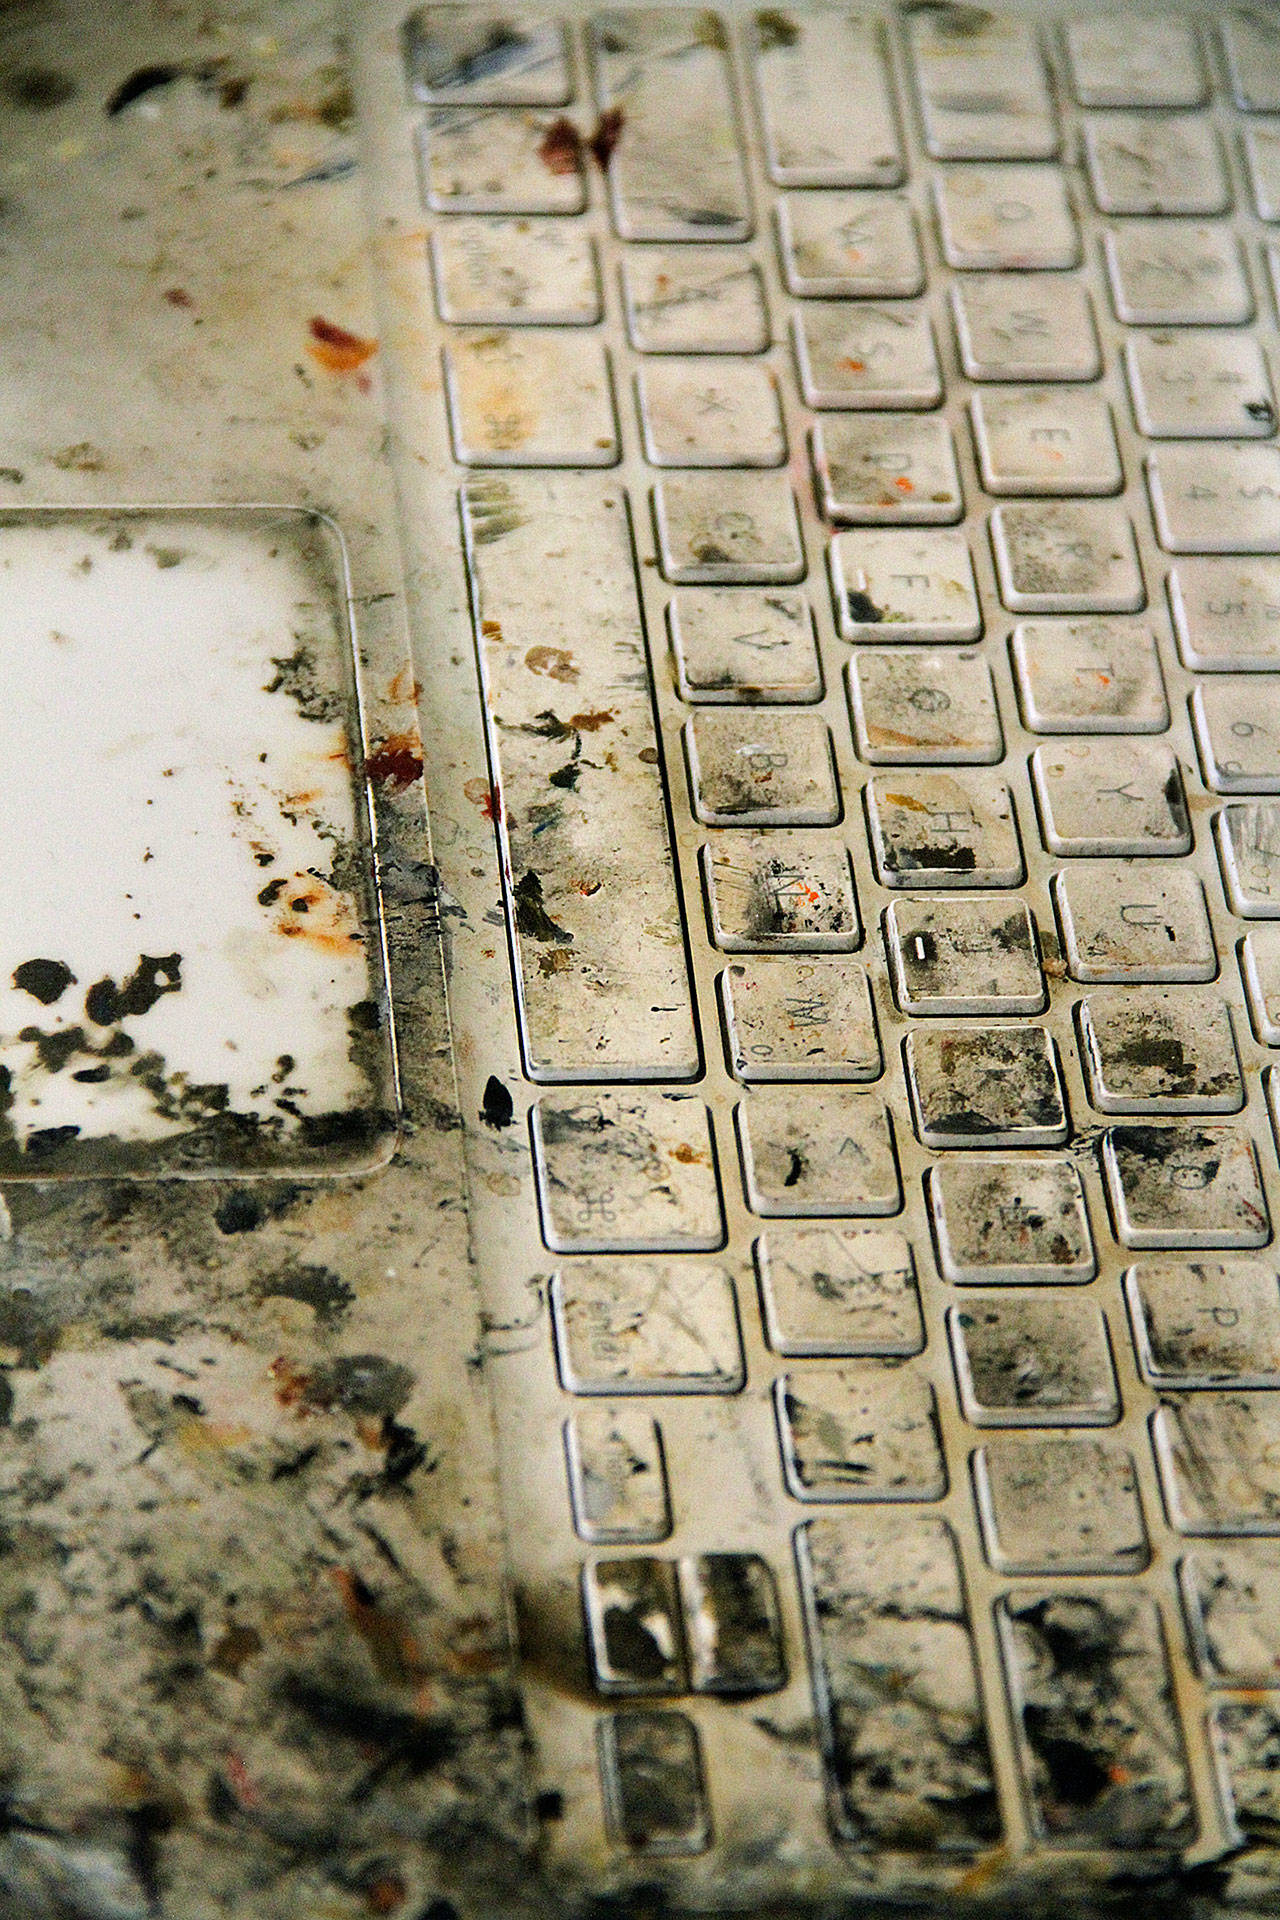 Robert McCauley’s ink- and paint-stained computer keyboard in his show, “American Fiction,” at BIMA. (Brian Kelly | Bainbridge Island Review)